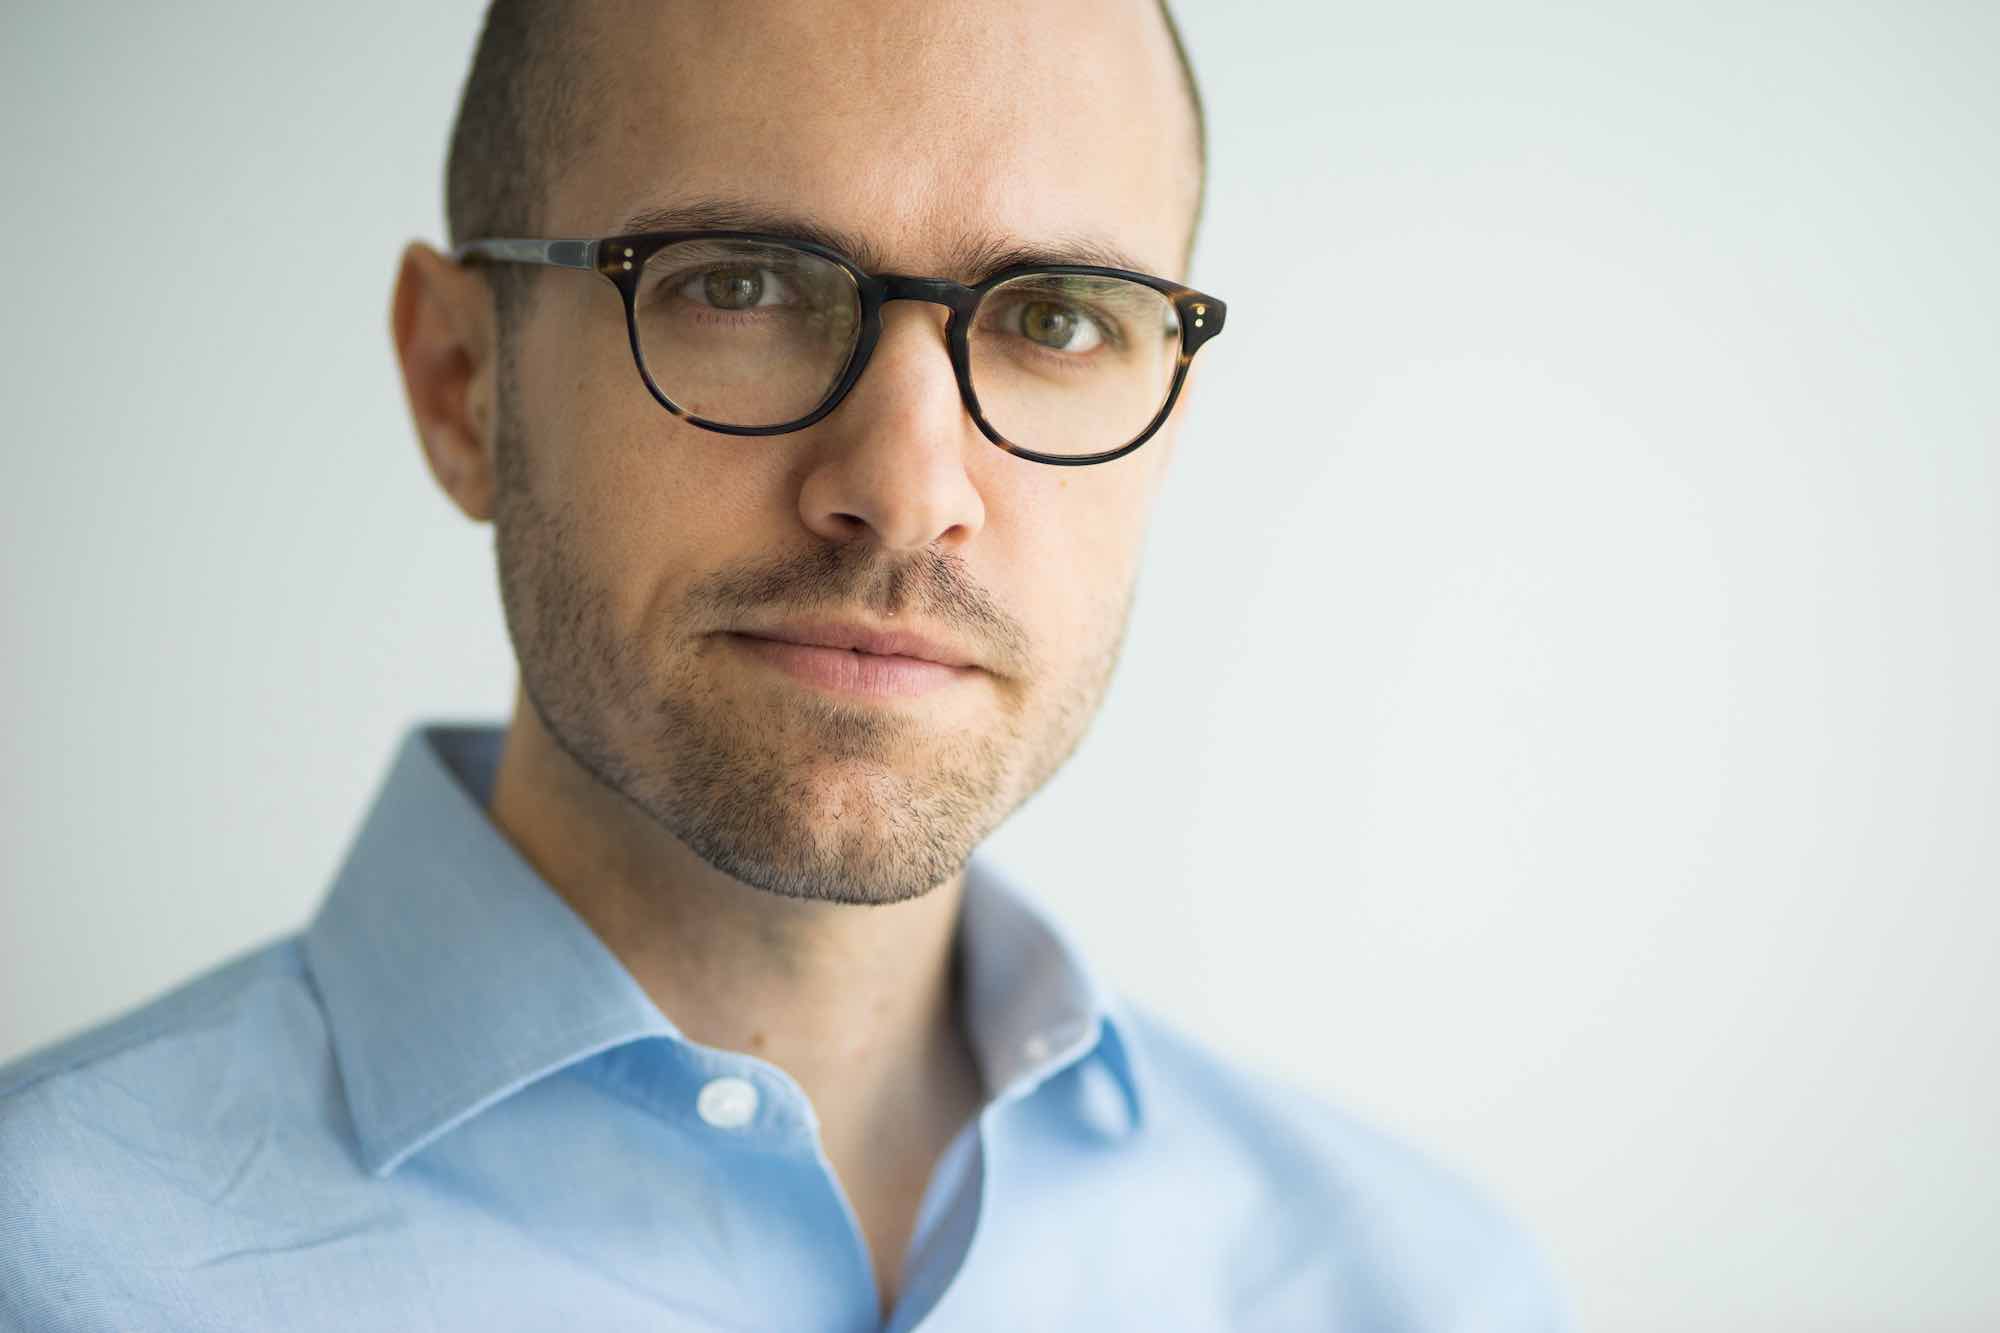 New York Times publisher A. G. Sulzberger. | Credit: New York Times